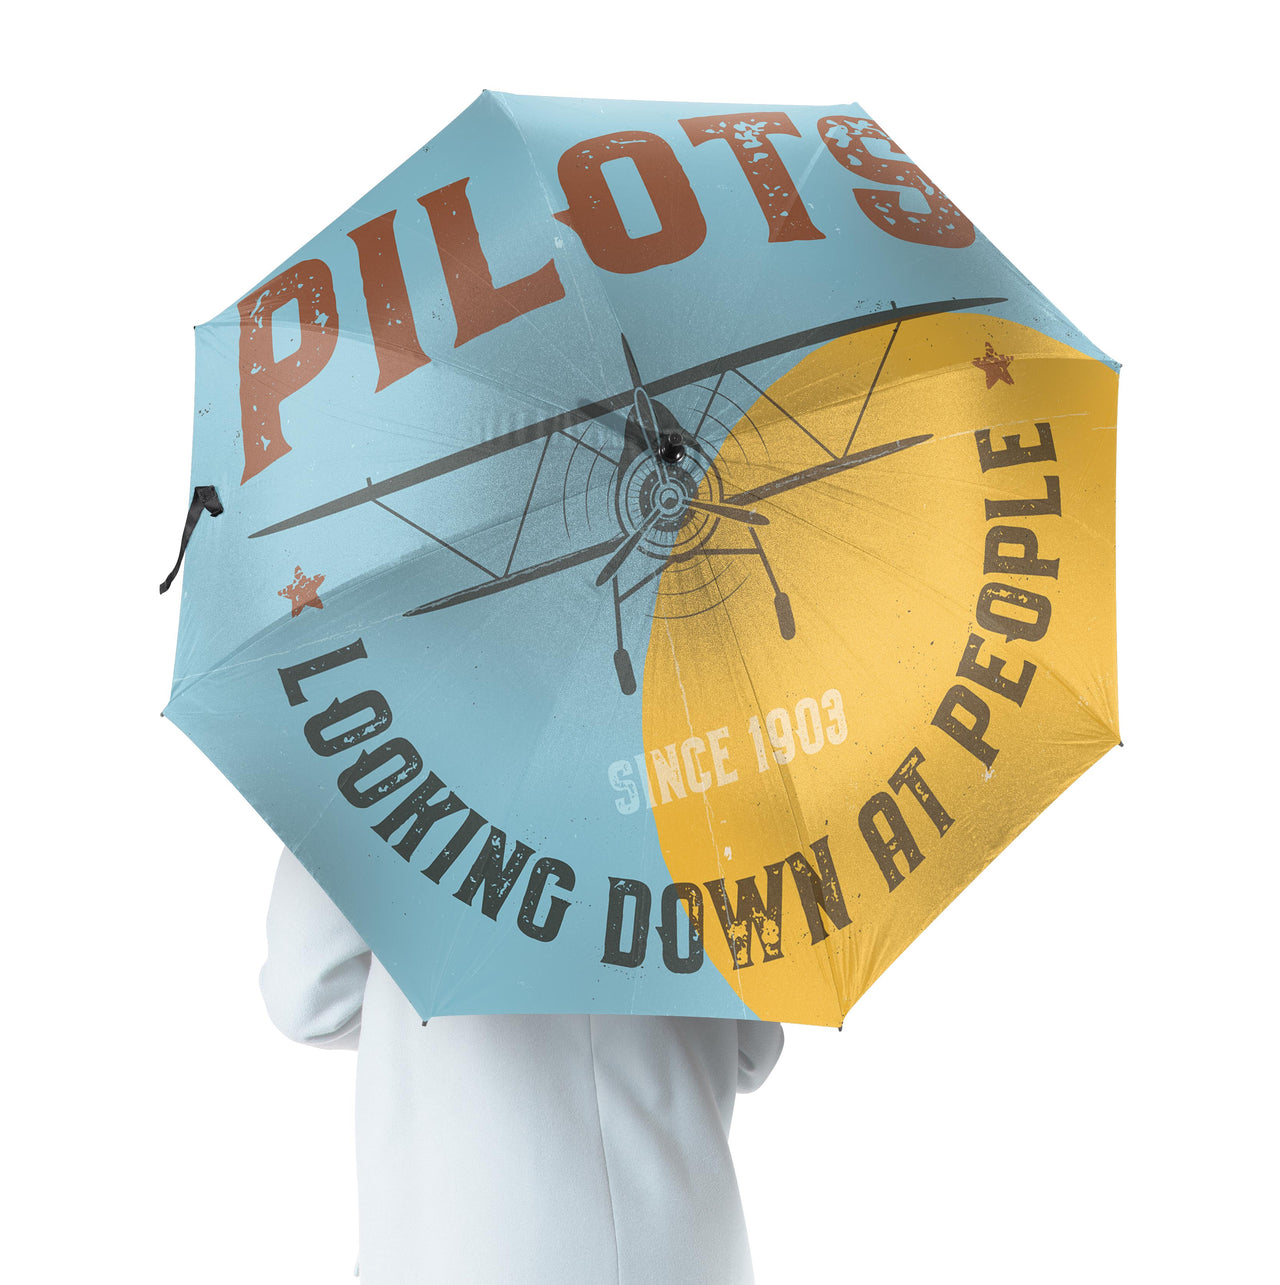 Pilots Looking Down at People Since 1903 Designed Umbrella